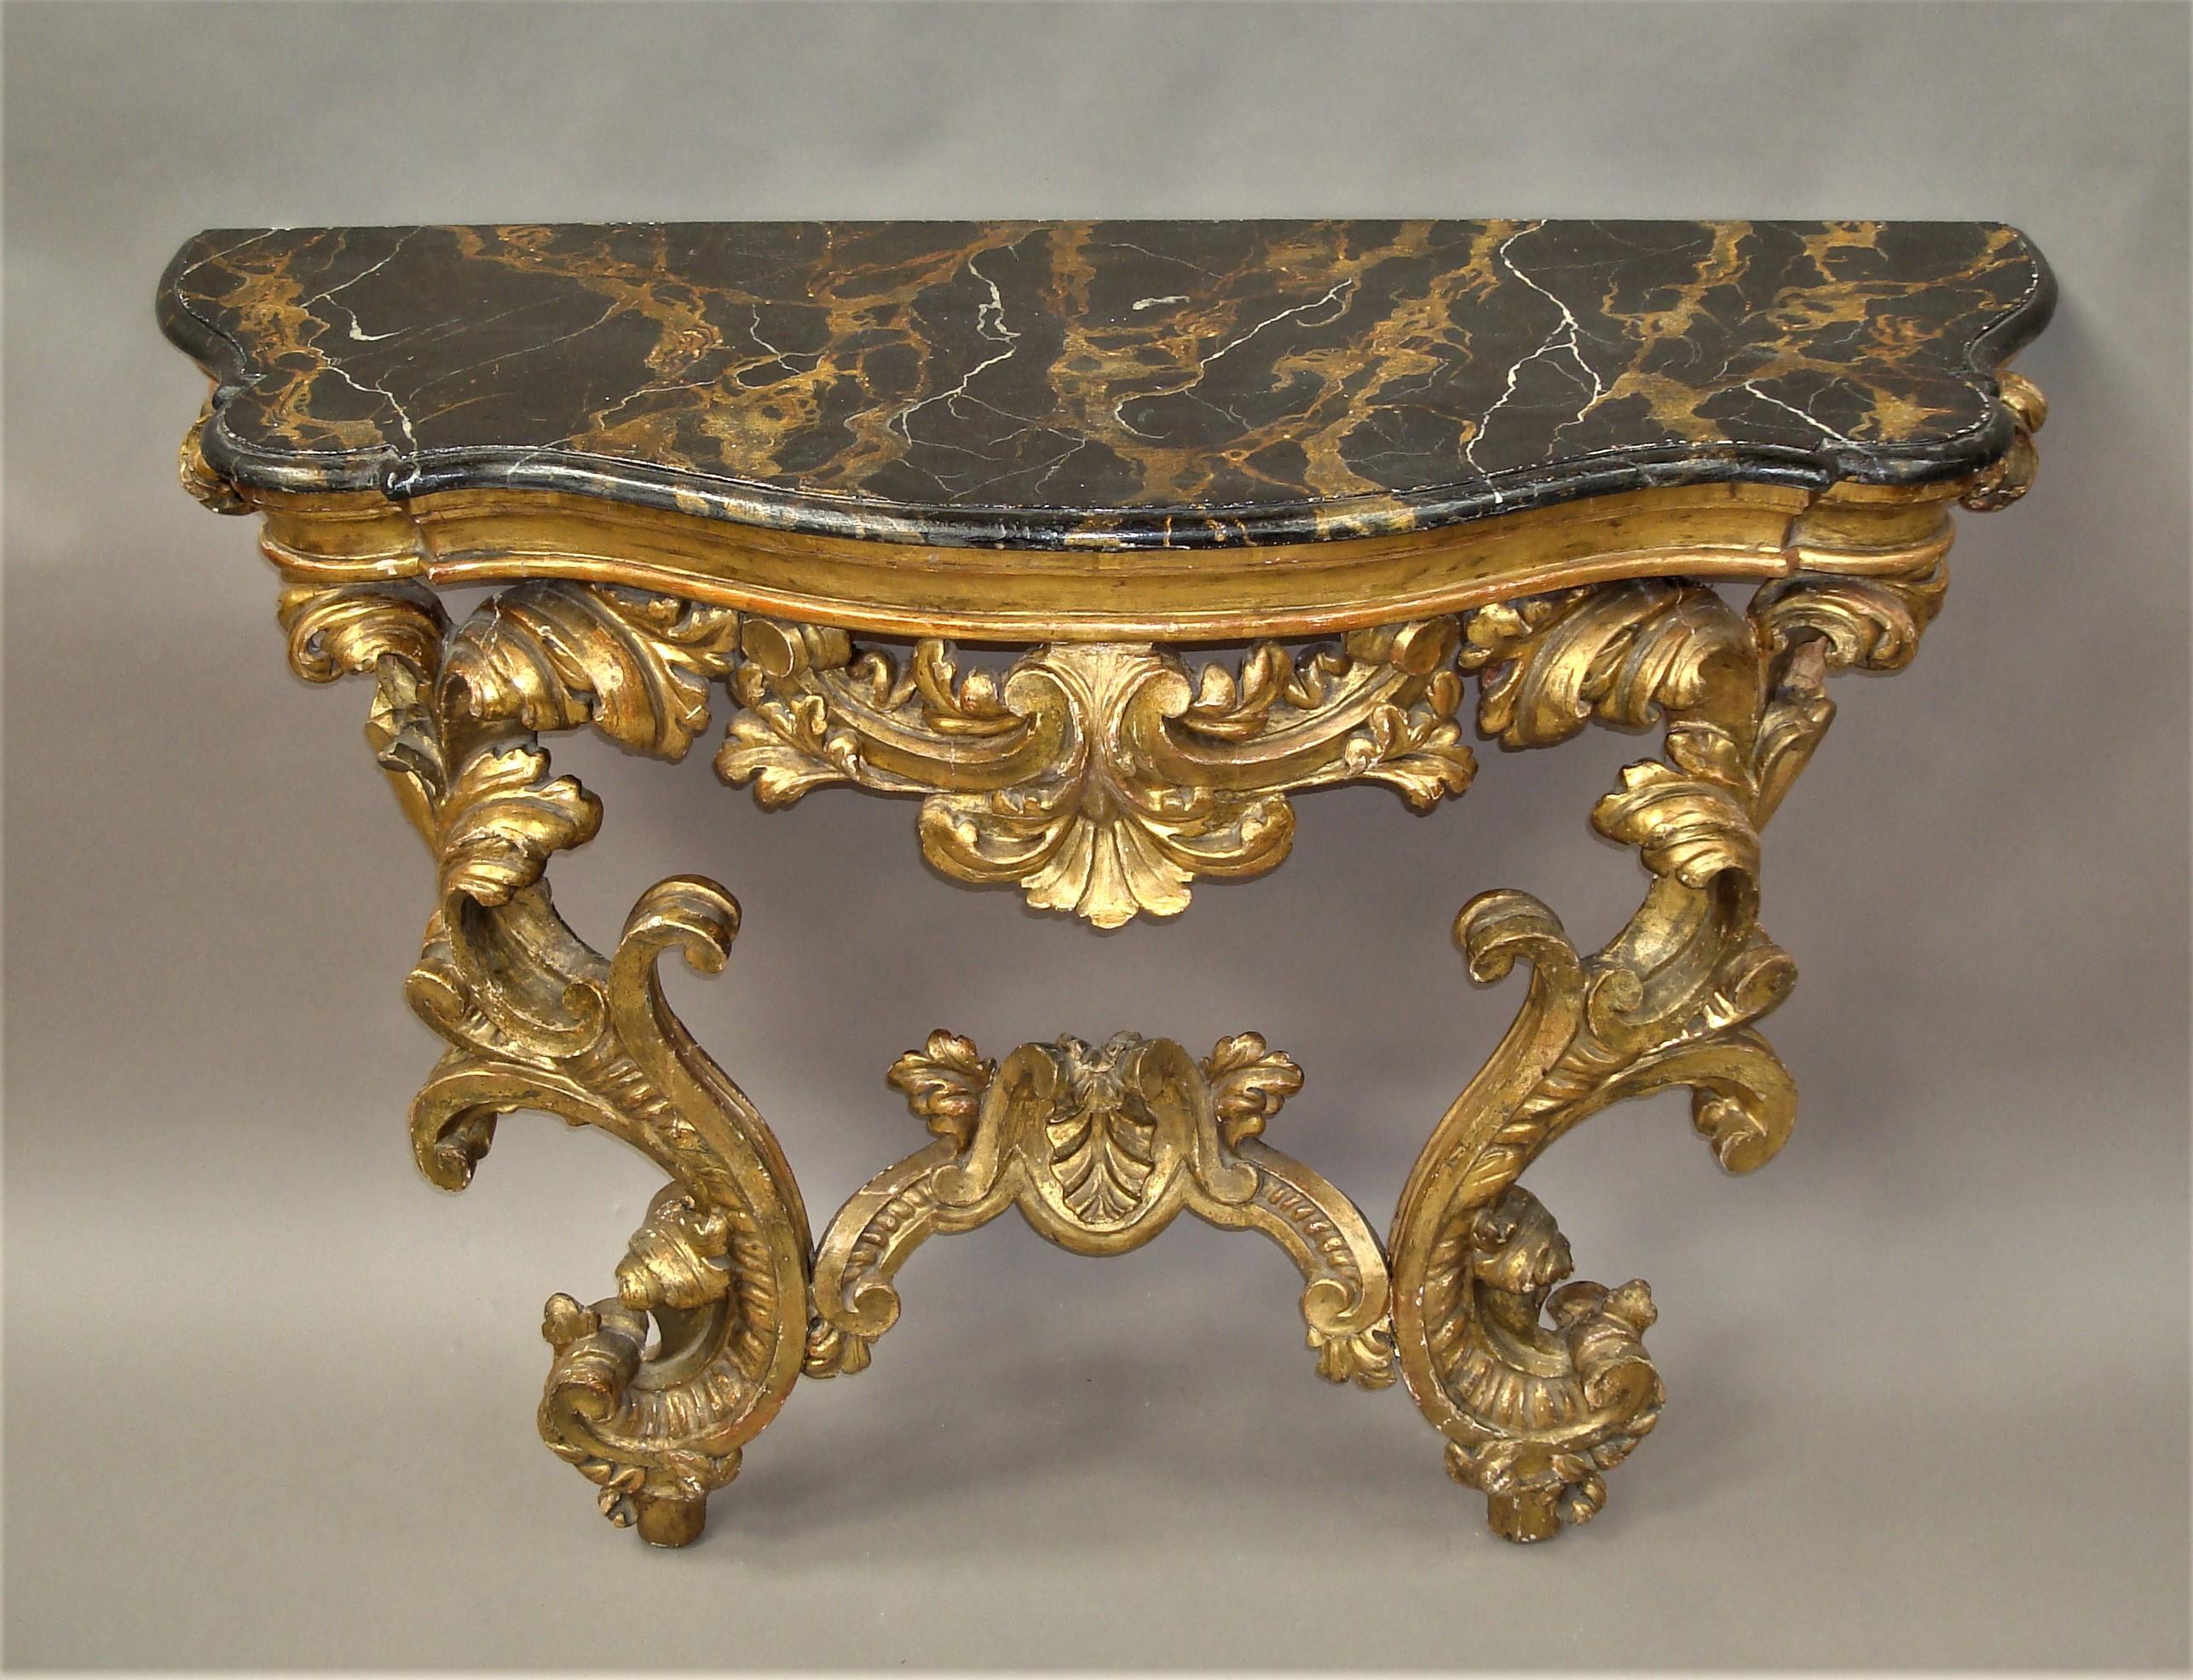 18th Century Venetian Rococo Giltwood Console Table In Good Condition For Sale In Moreton-in-Marsh, Gloucestershire